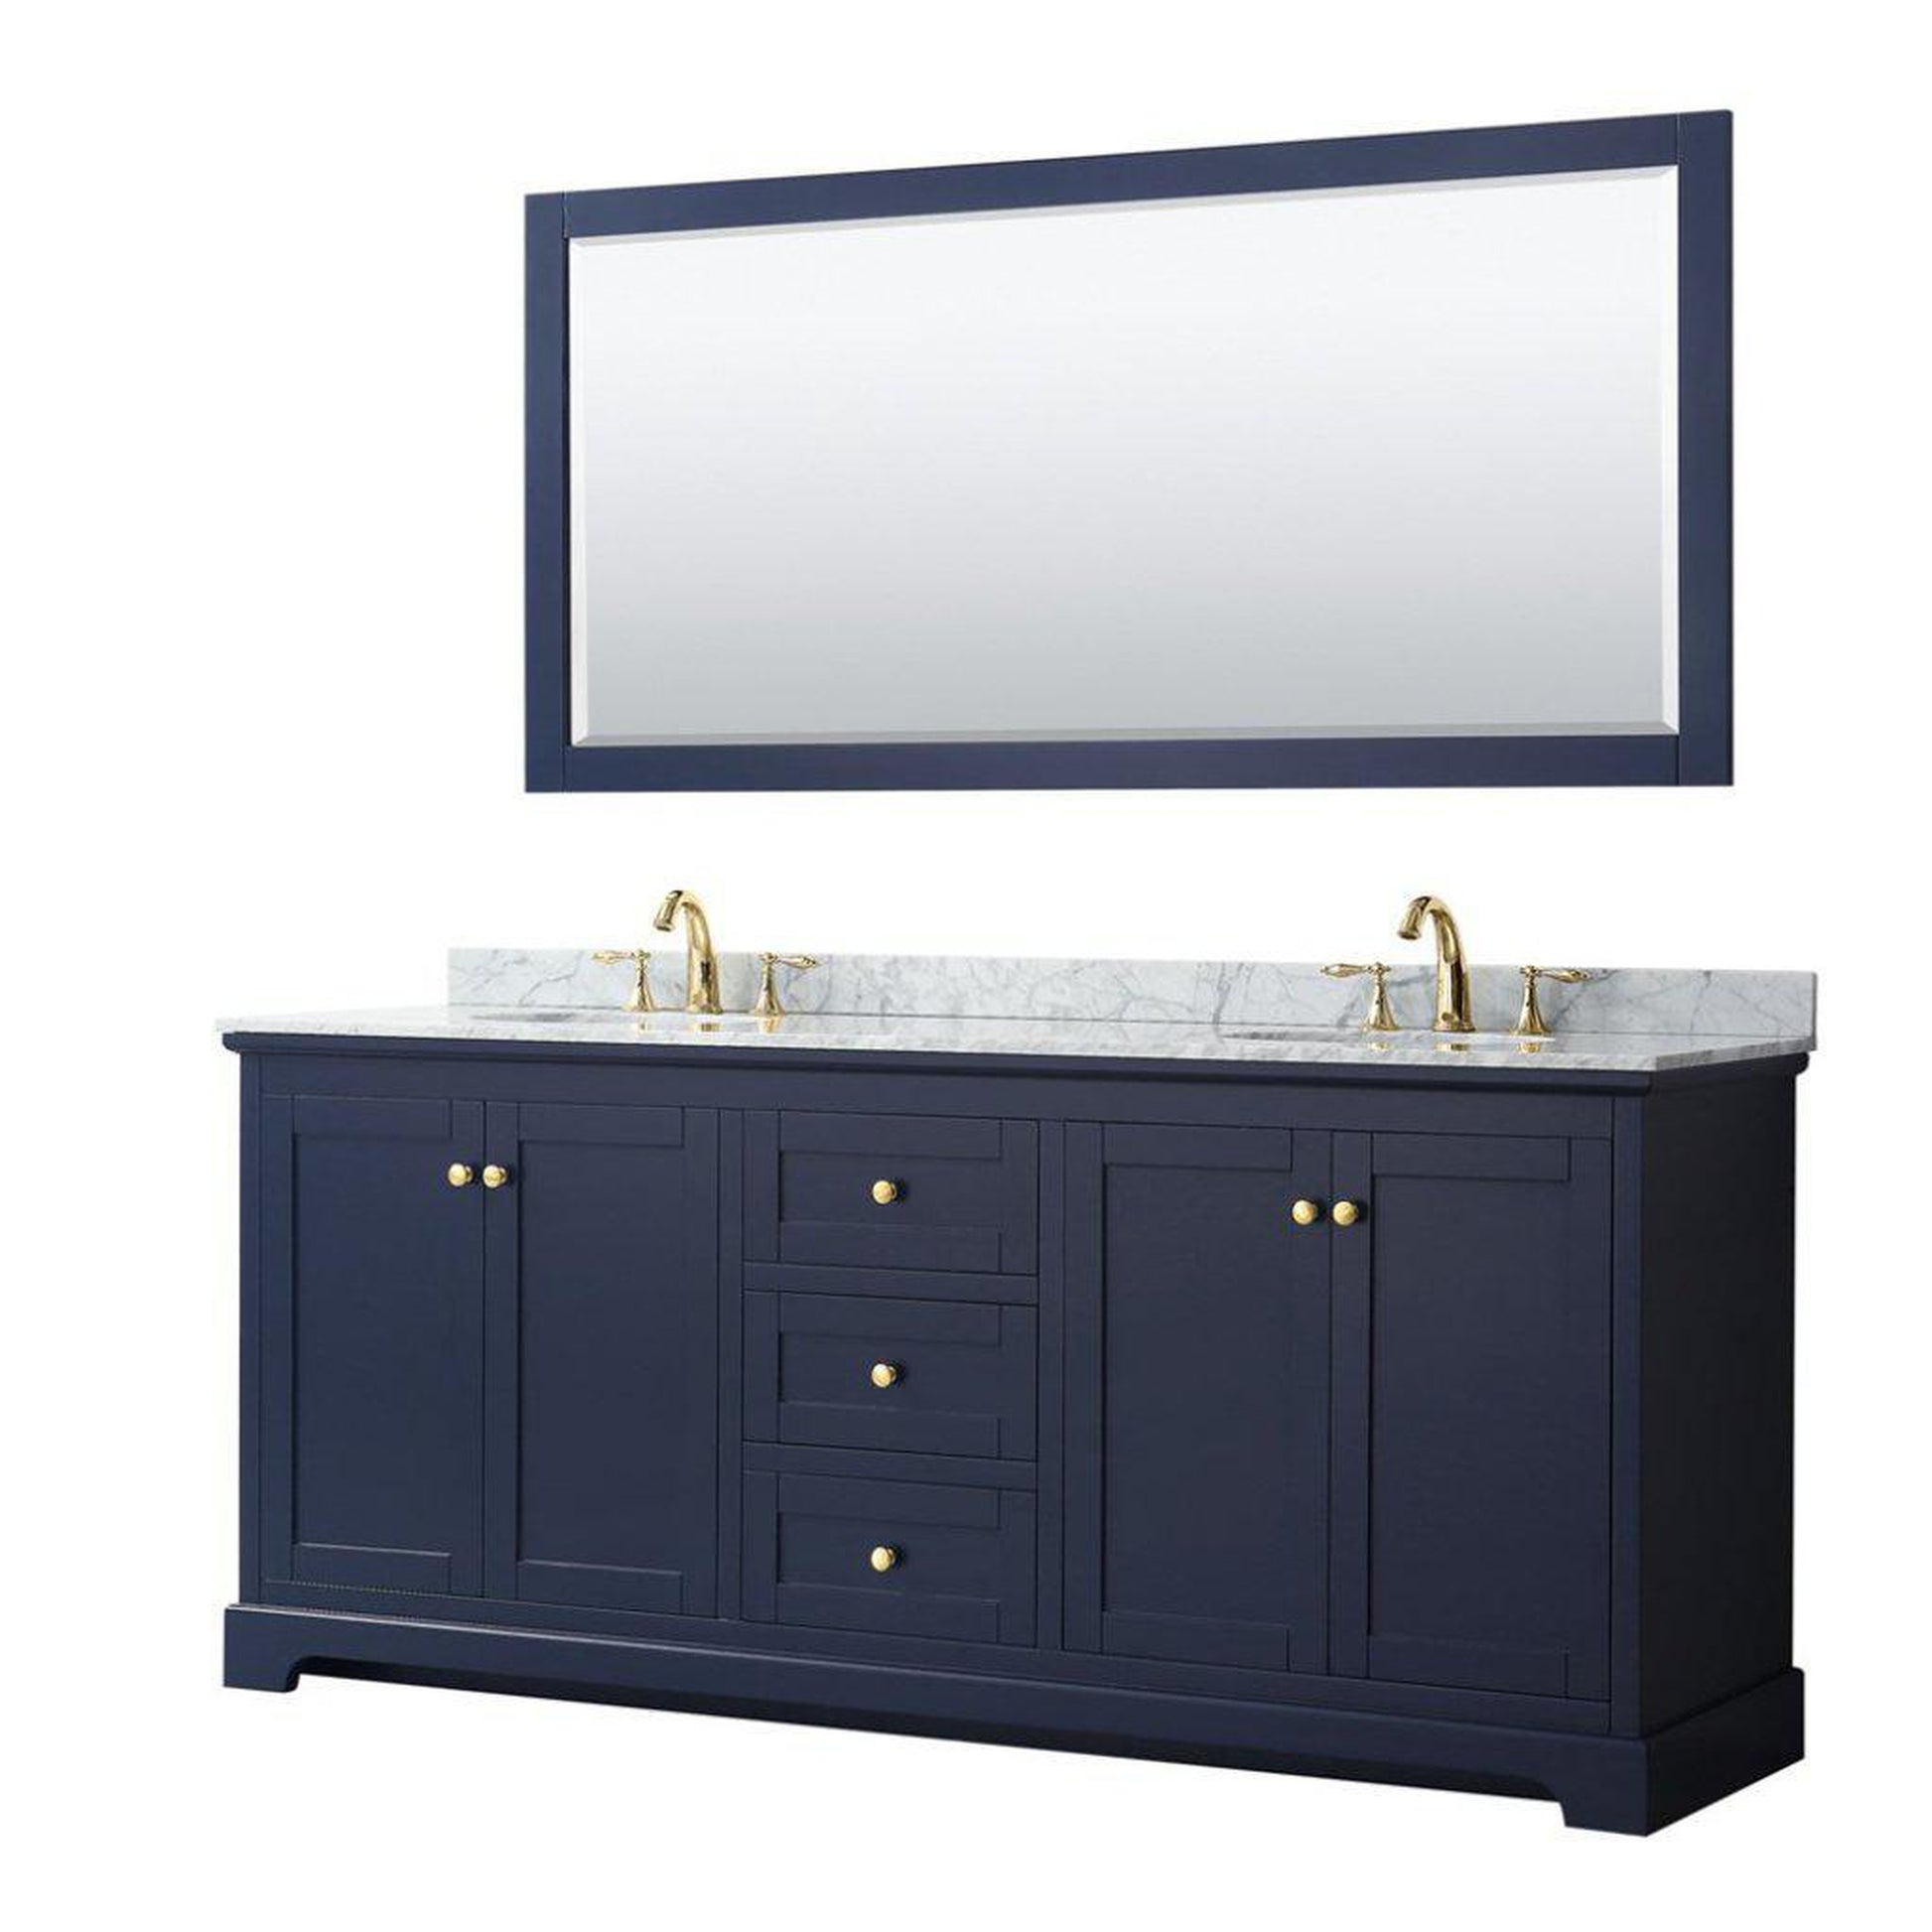 Wyndham Collection Avery 80" Dark Blue Double Bathroom Vanity Set With White Carrara Marble Countertop With 3-Hole Faucet And 8" Oval Sink And 70" Mirror